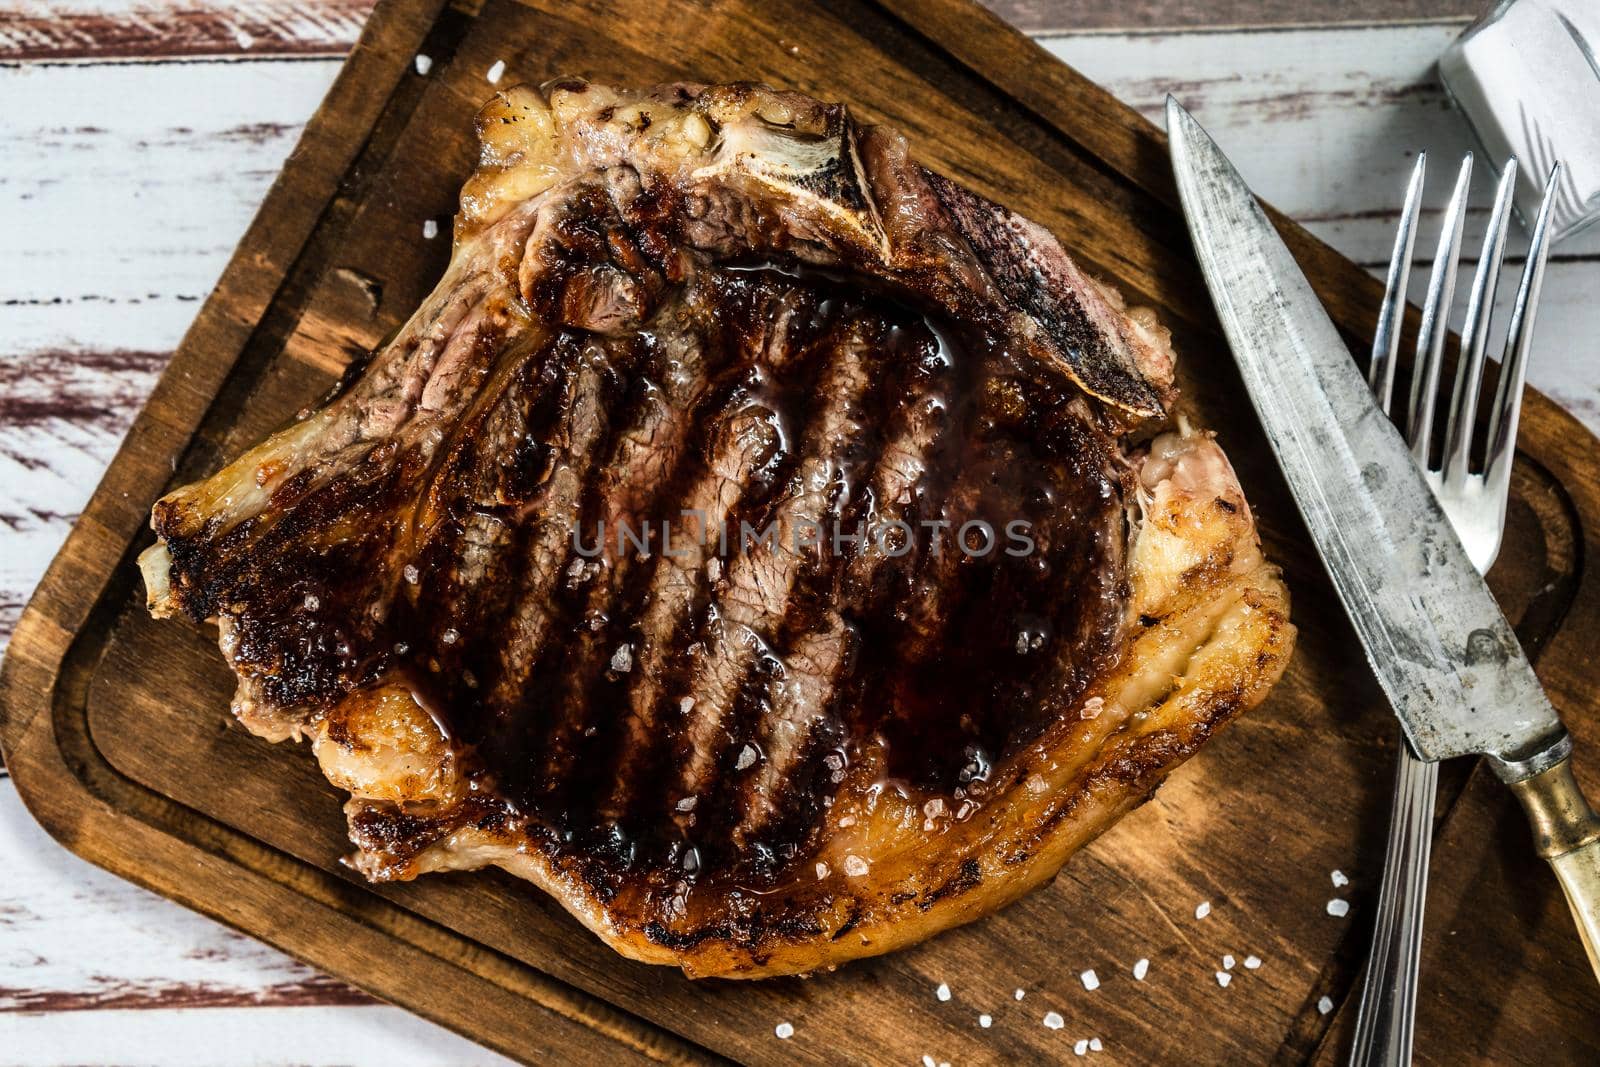 Incredible t-bone cooked on the grill or barbecue on a wooden board with cutlery on the side. Top view.